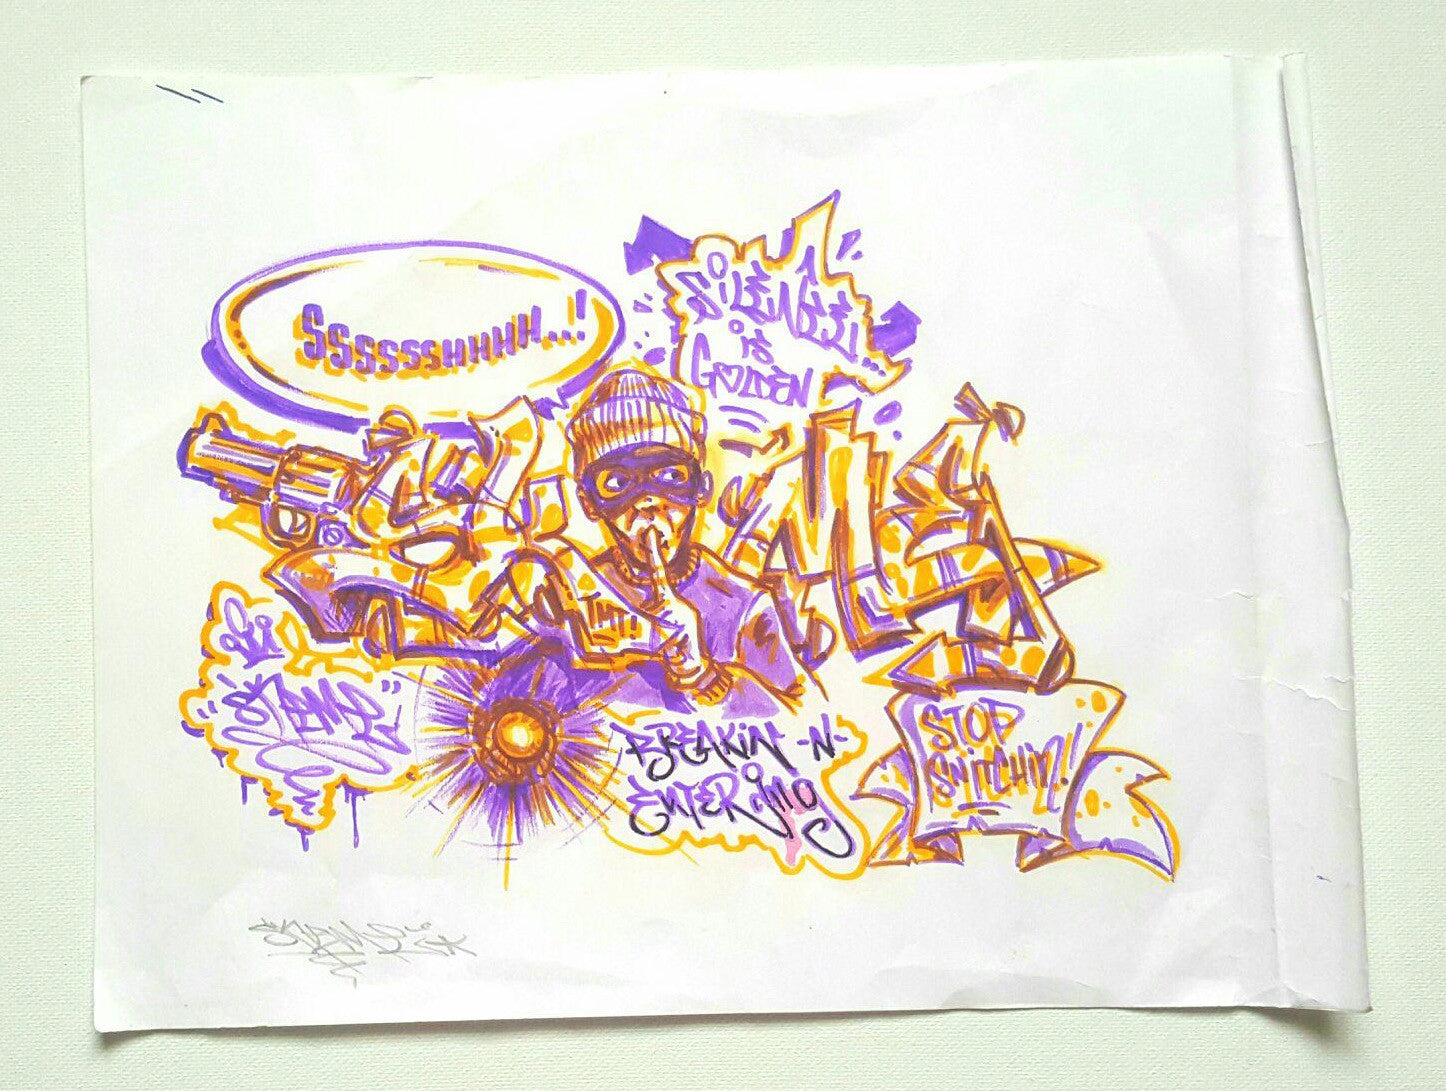 SKEME - "Silence is Golden" Black Book Drawing